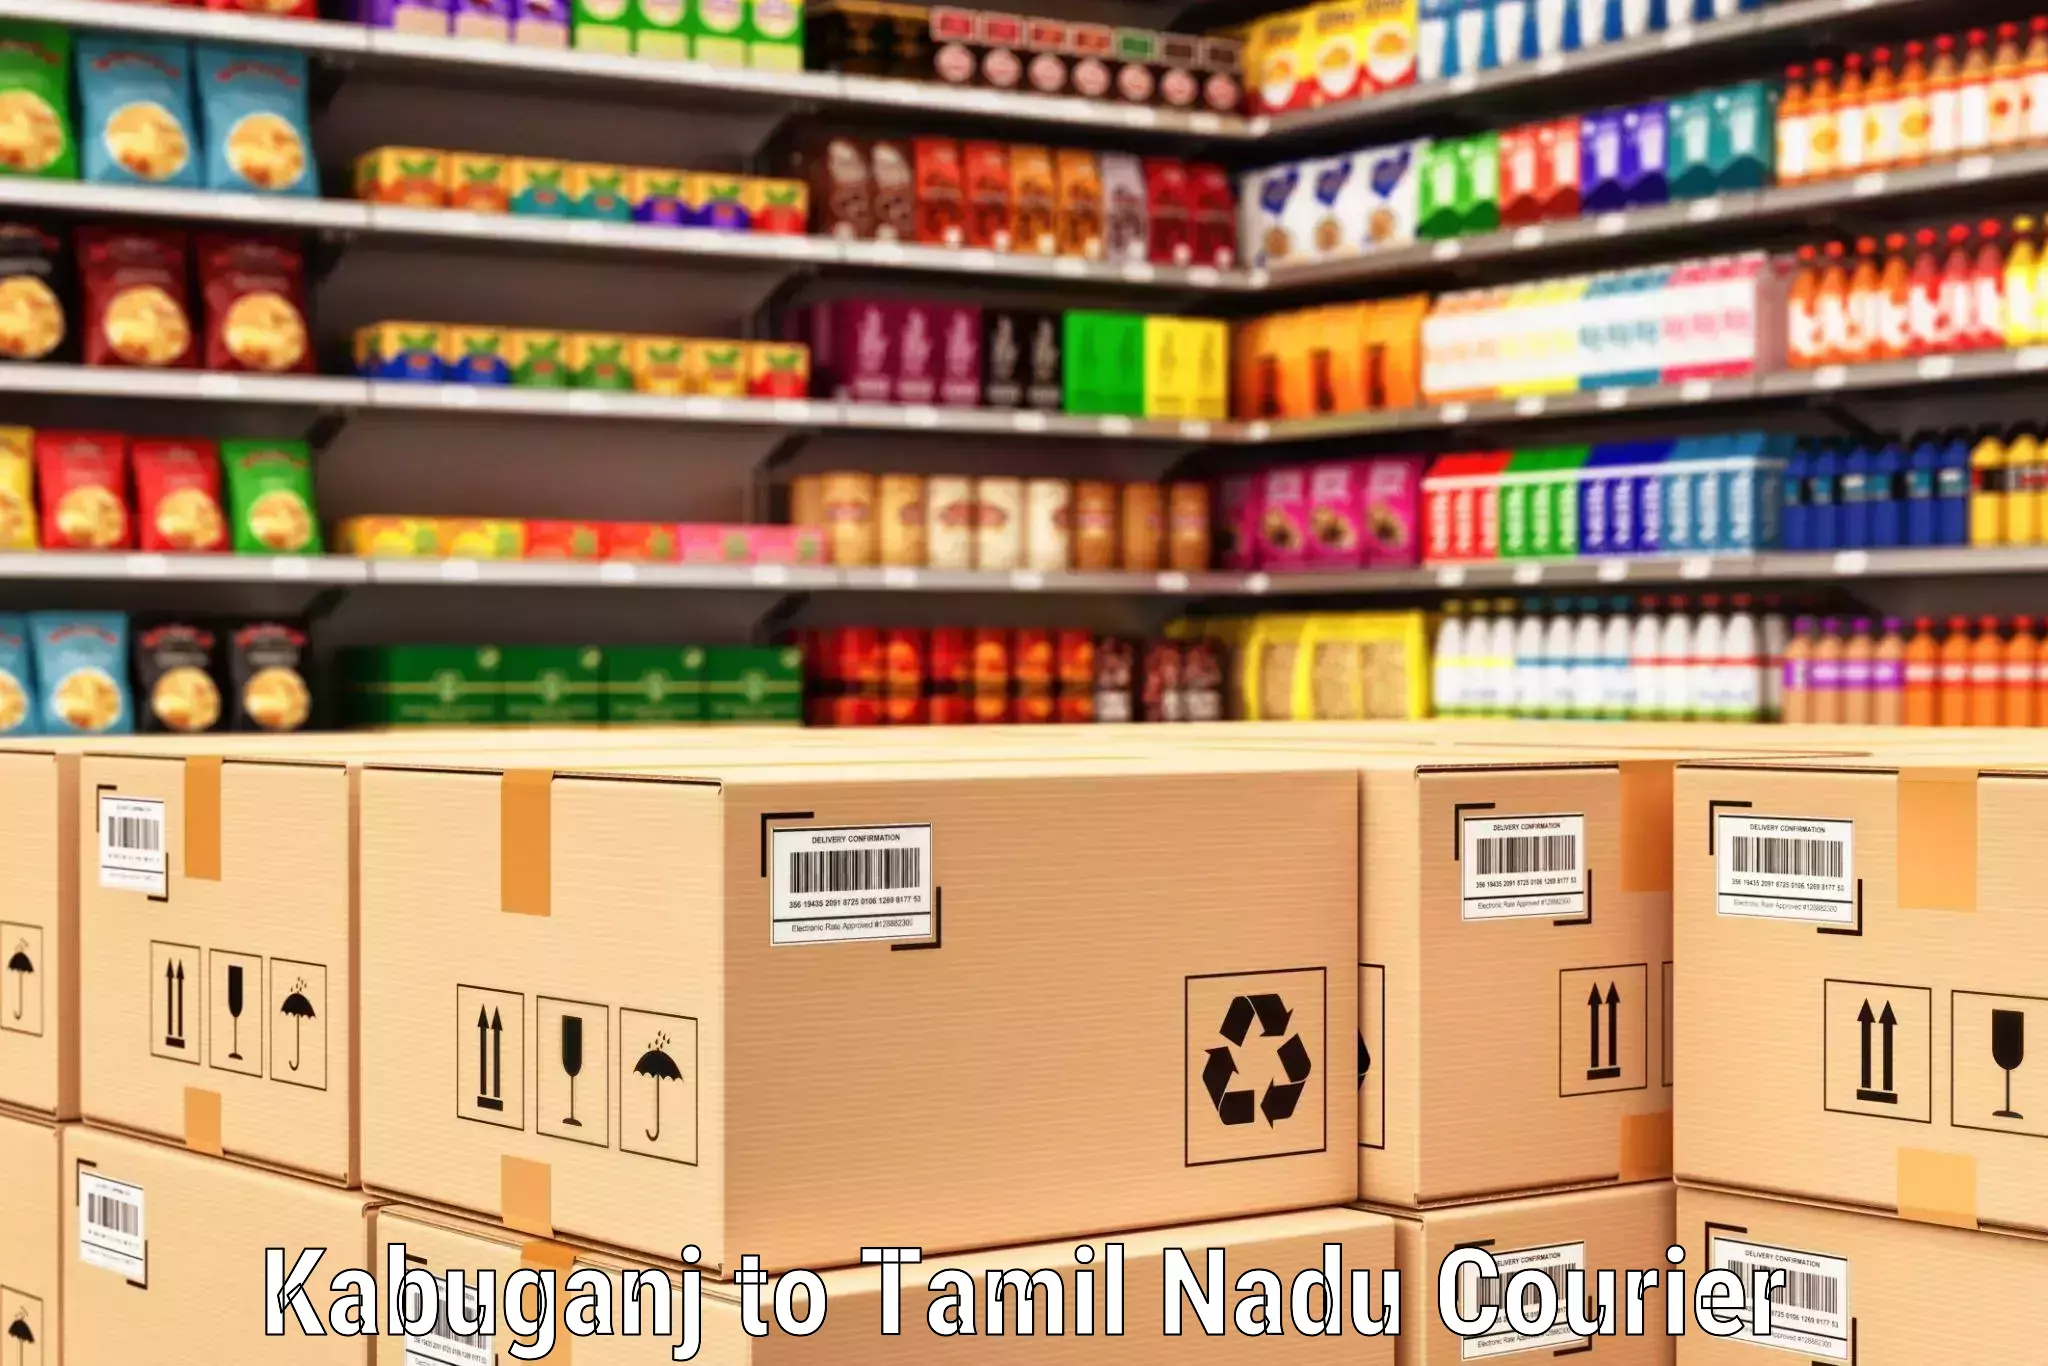 Same-day delivery solutions Kabuganj to Sivakasi